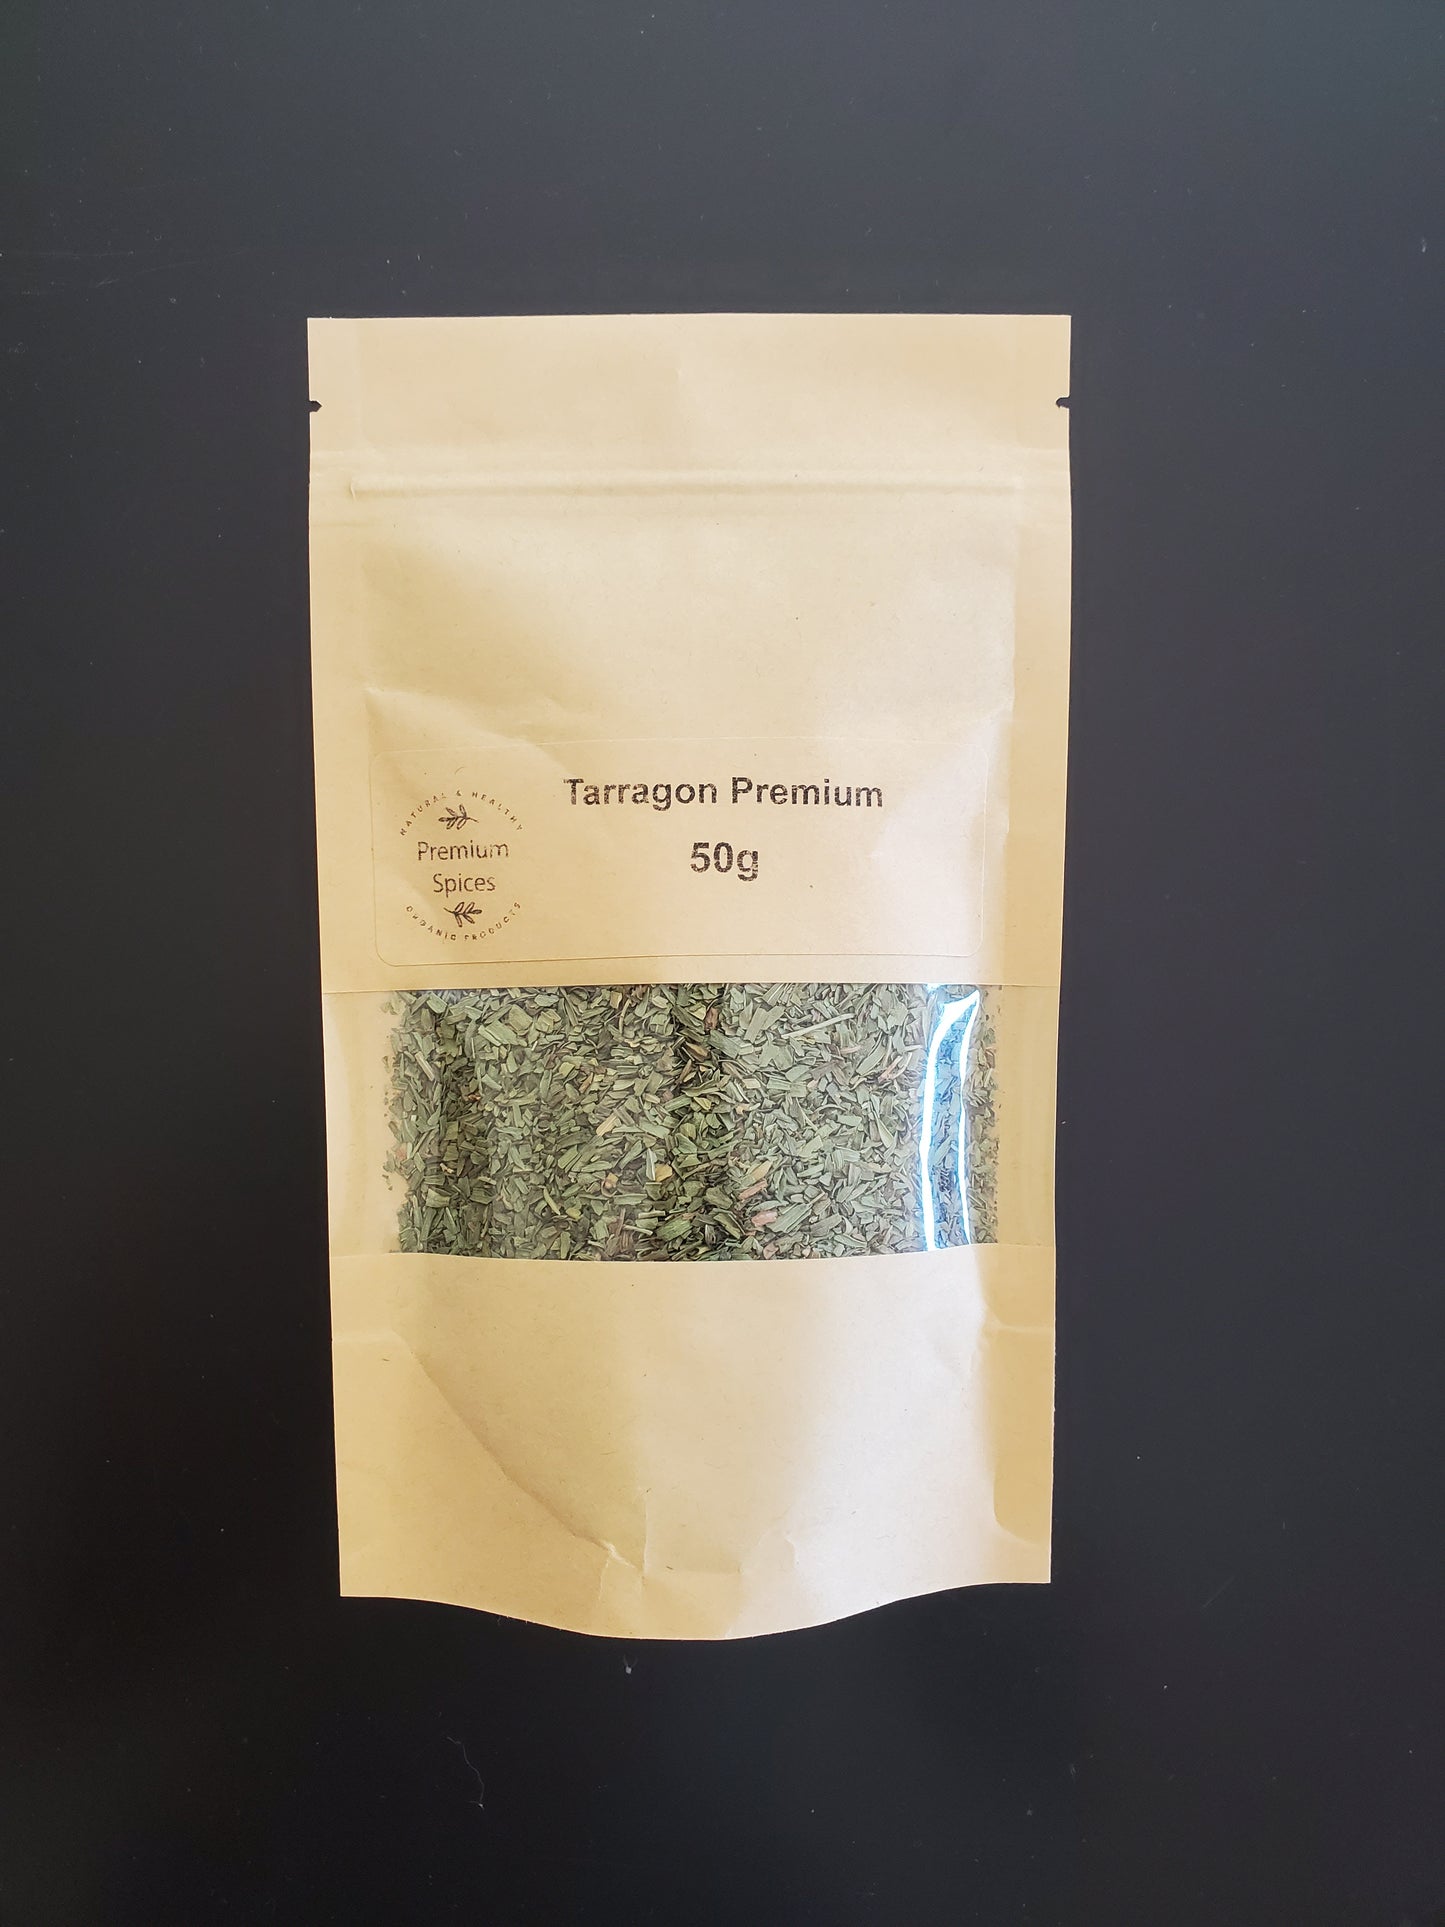 Tarragon NZ "Dragon Herb" BEST PRICE in NZ and the BEST PREMIUM QUALITY! Showing 50g pack of it!